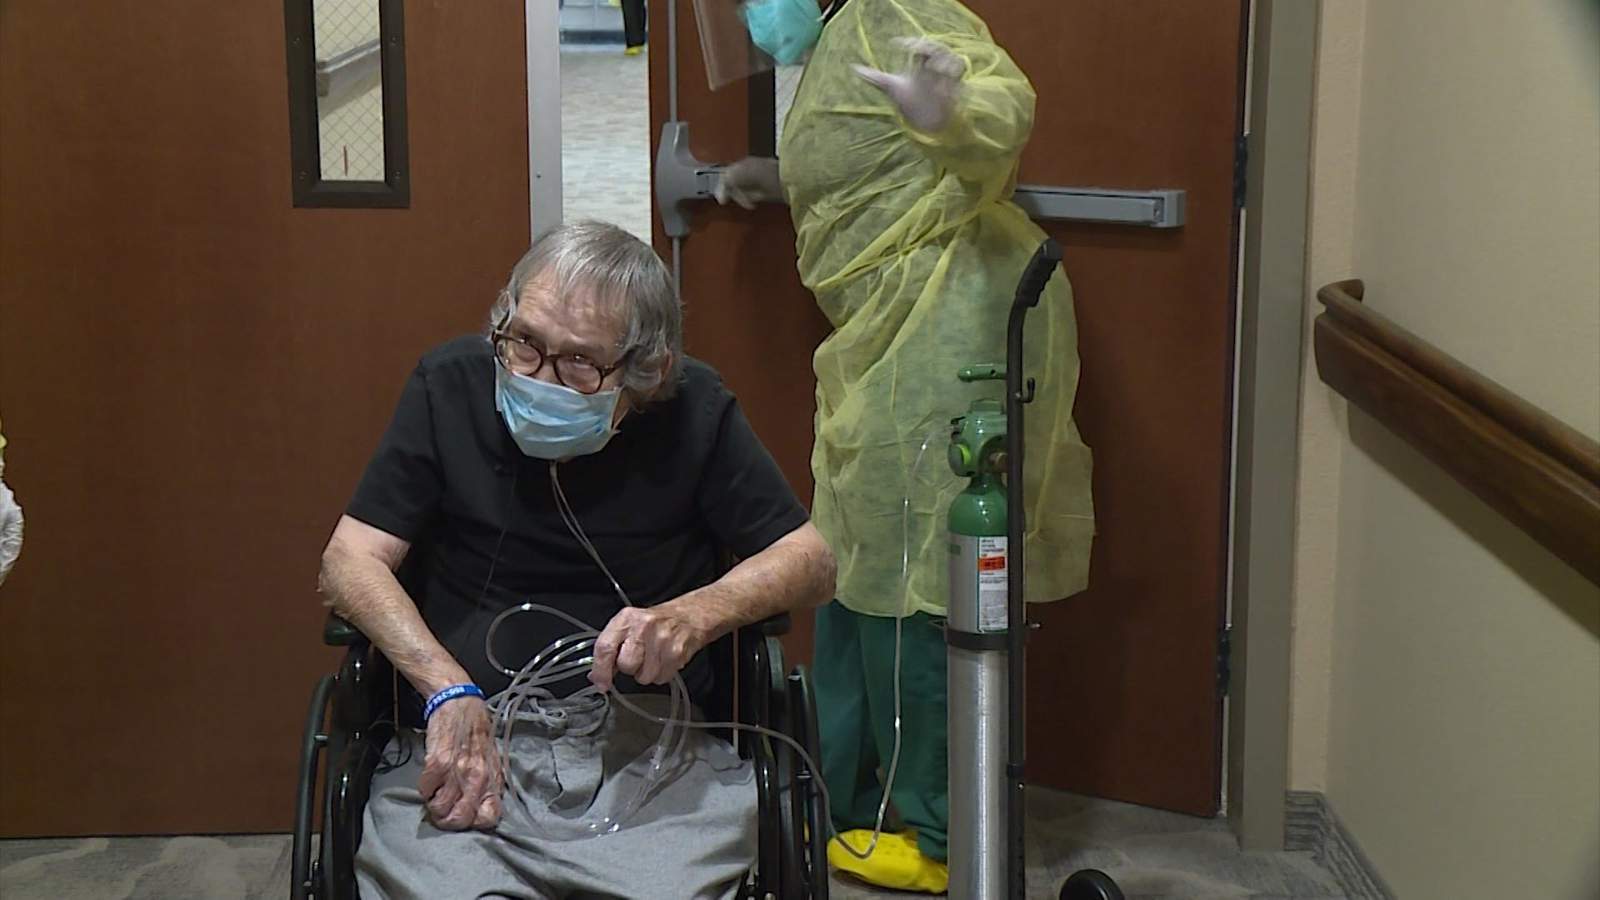 Coronavirus is rapidly spreading in Texas nursing homes, state figures show